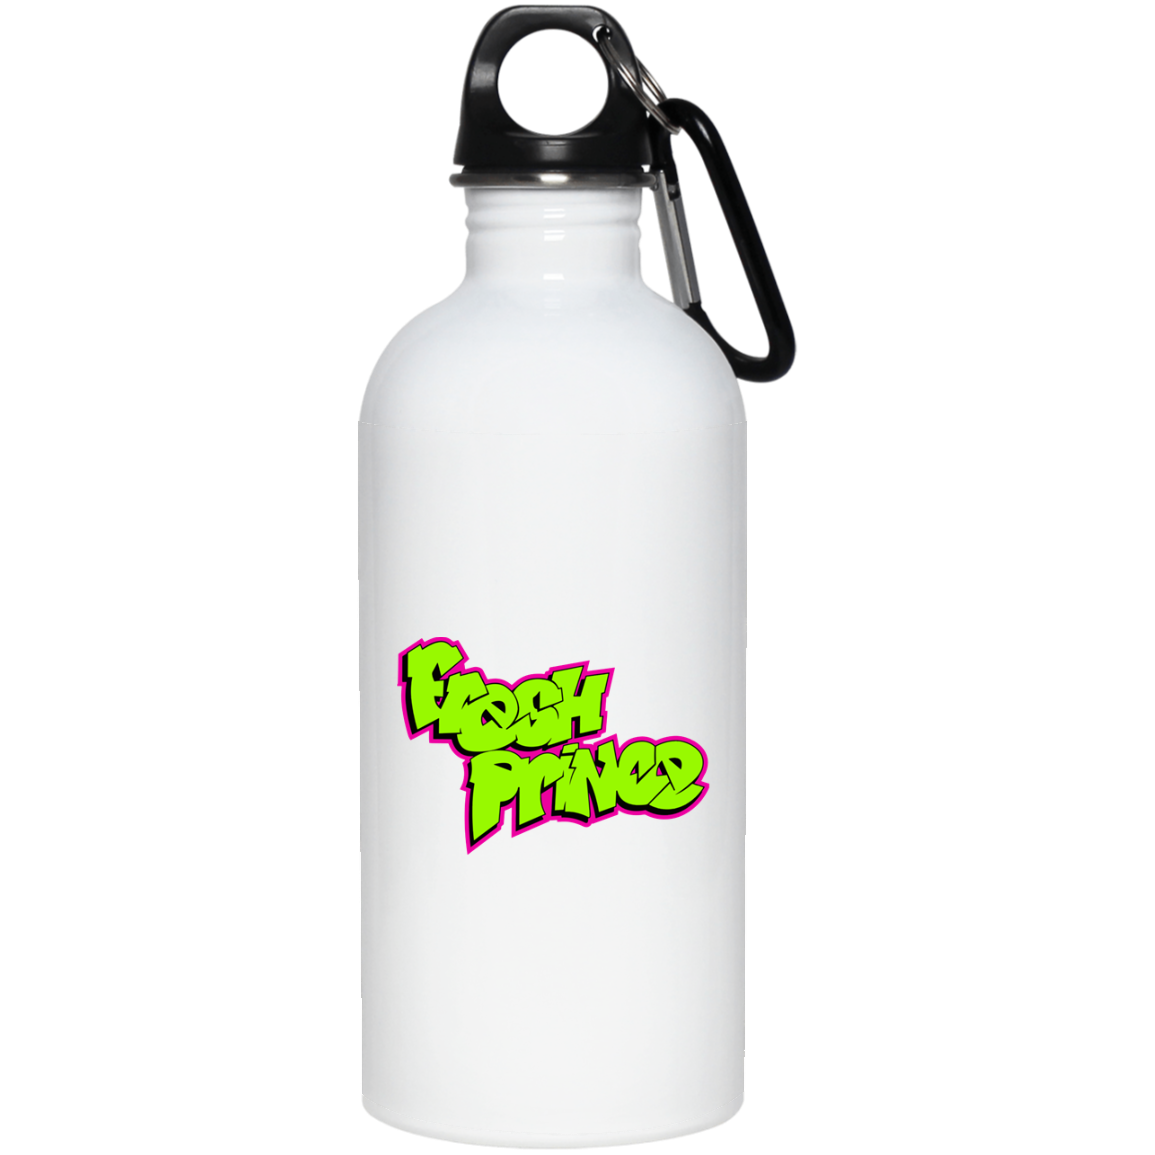 Prince 20 oz. Stainless Steel Water Bottle